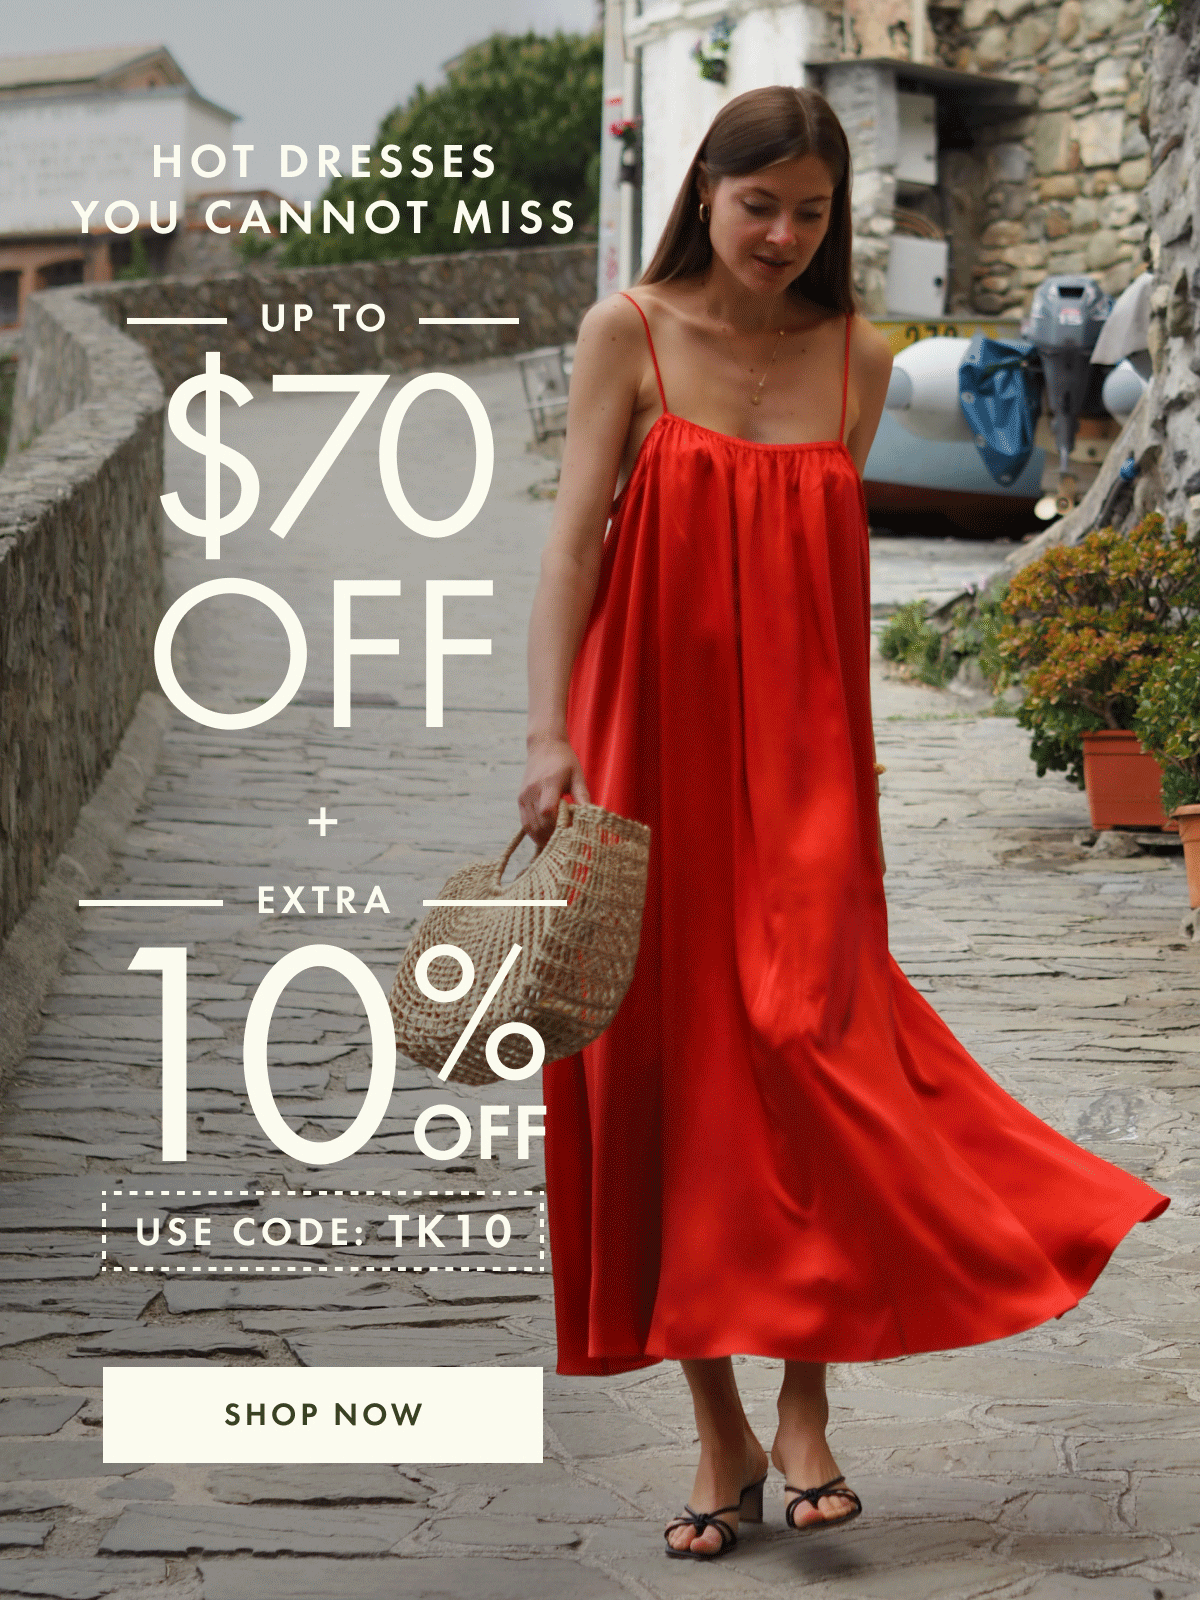 LILYSILK Factory: Up to $70 off + extra 10% off - Lily Silk